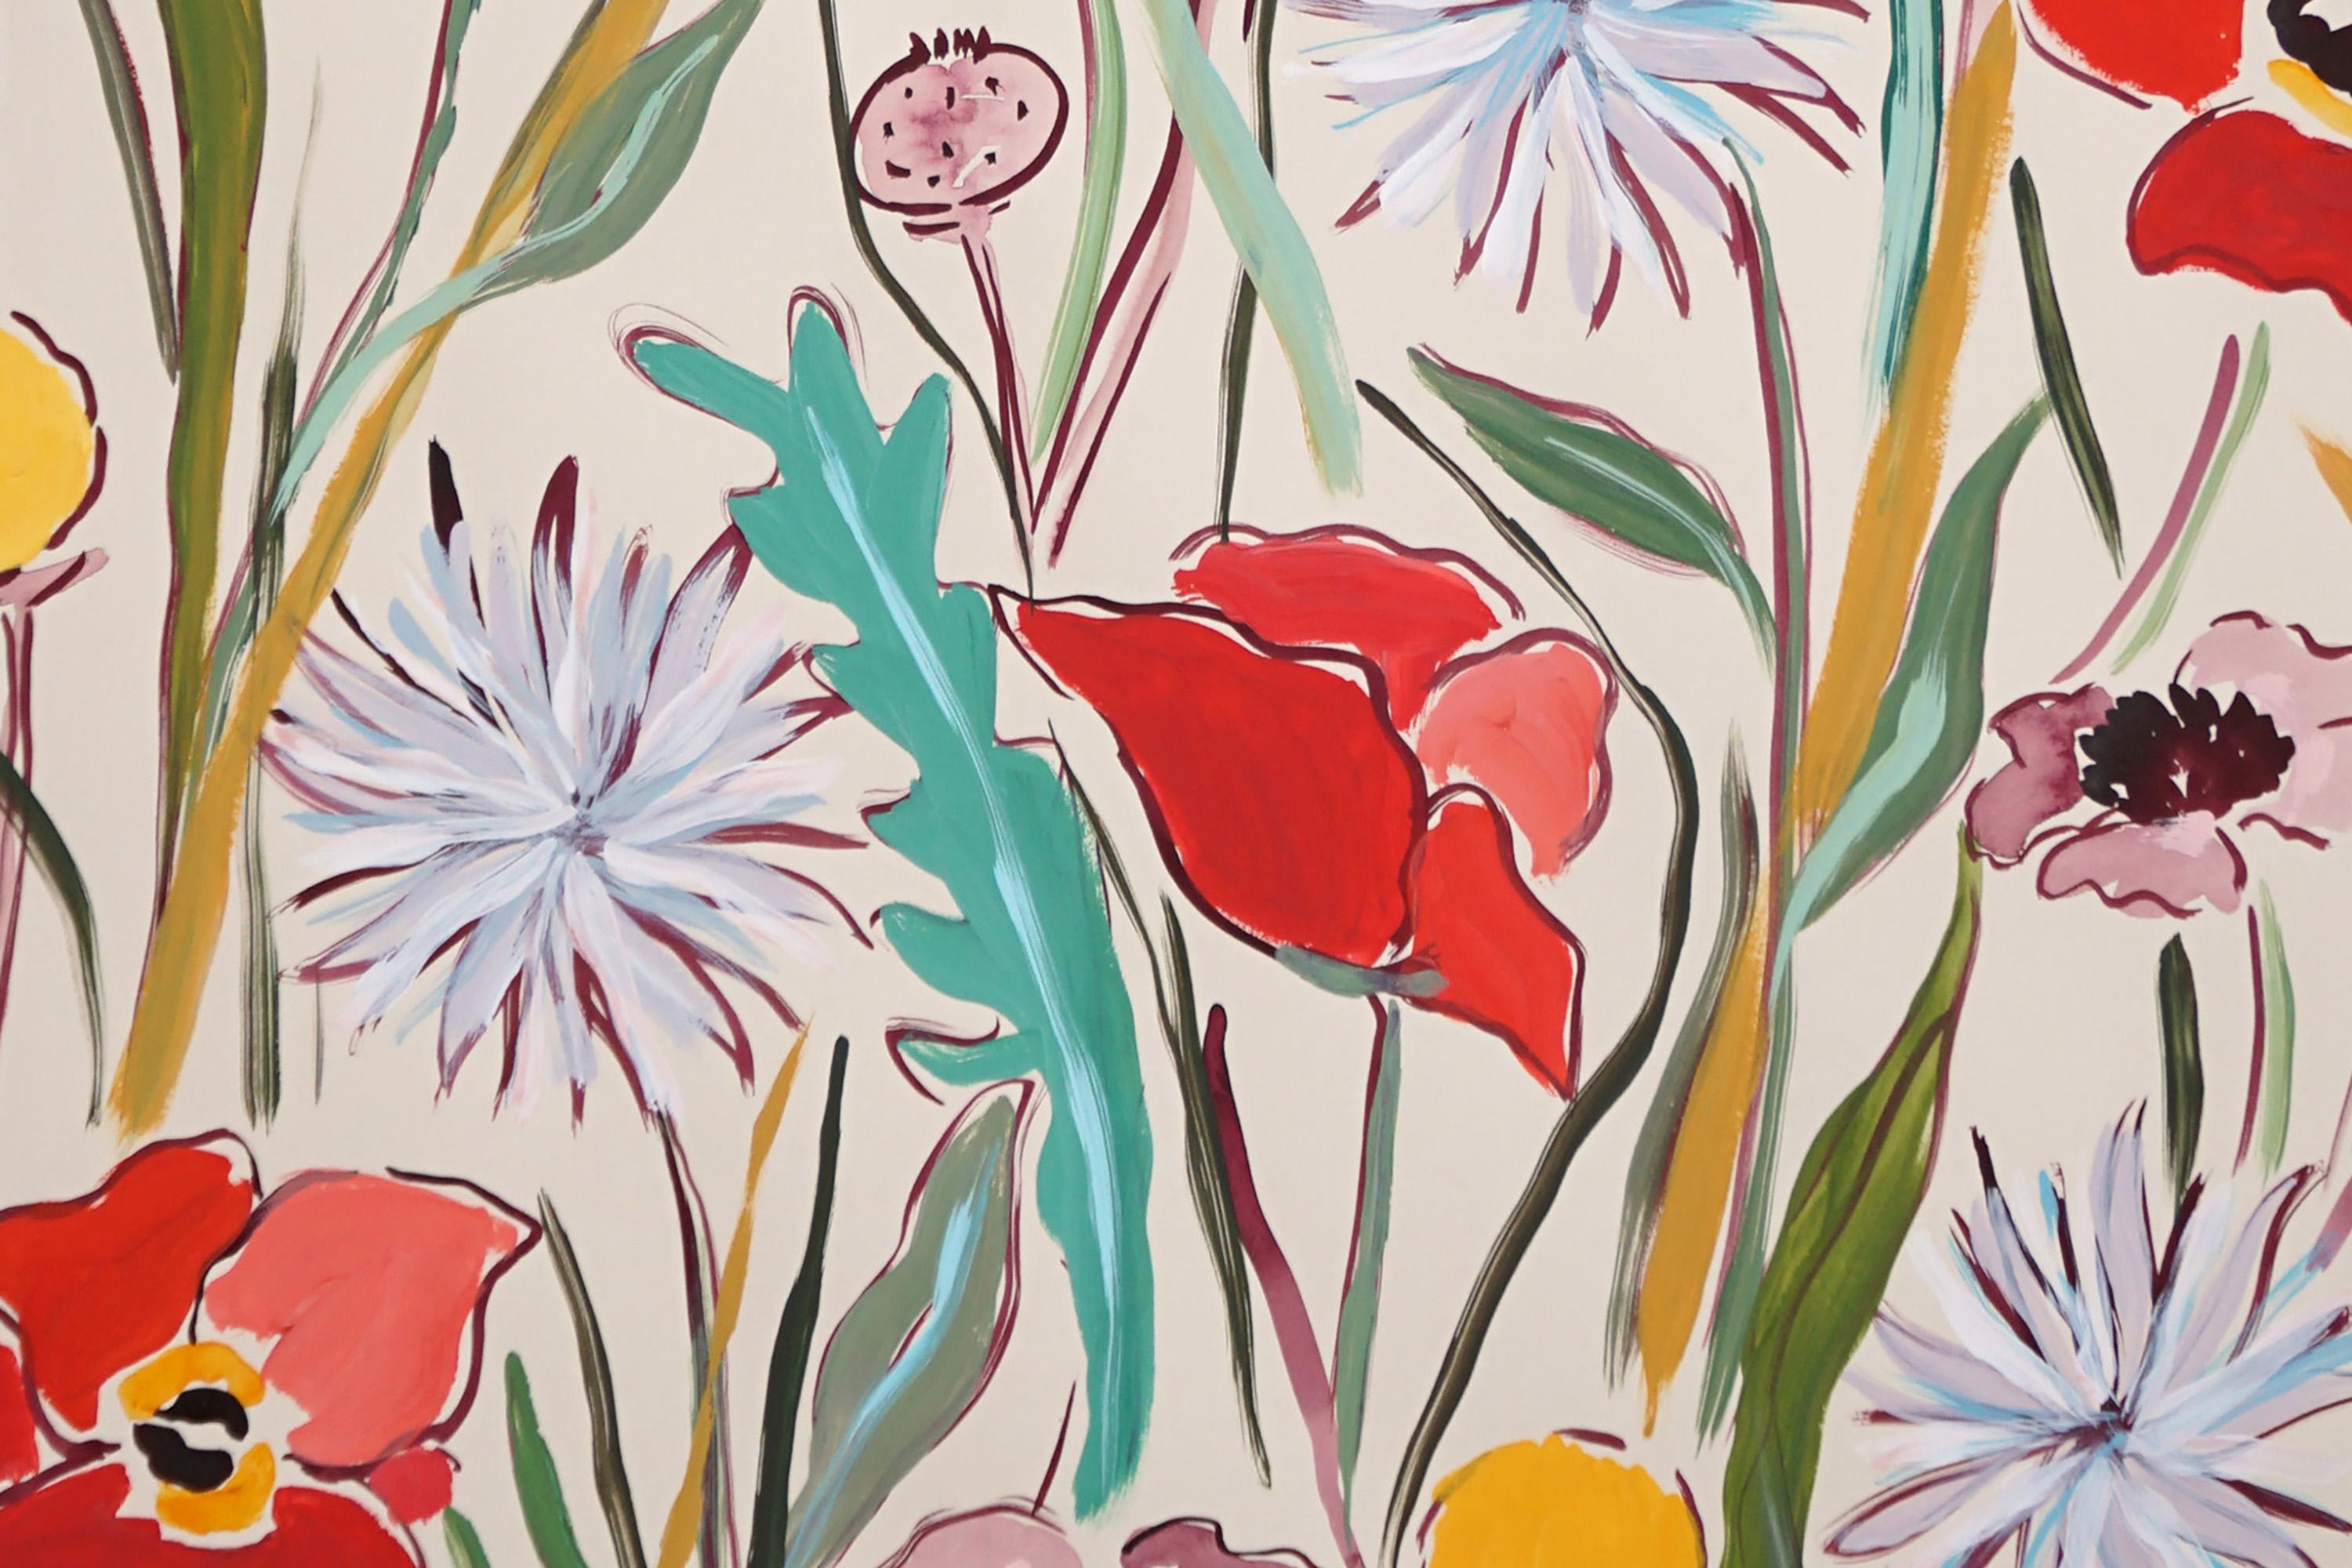 Pastel Wildflowers II, Illustration Style Diptych, Red Poppies and Dandelions  4